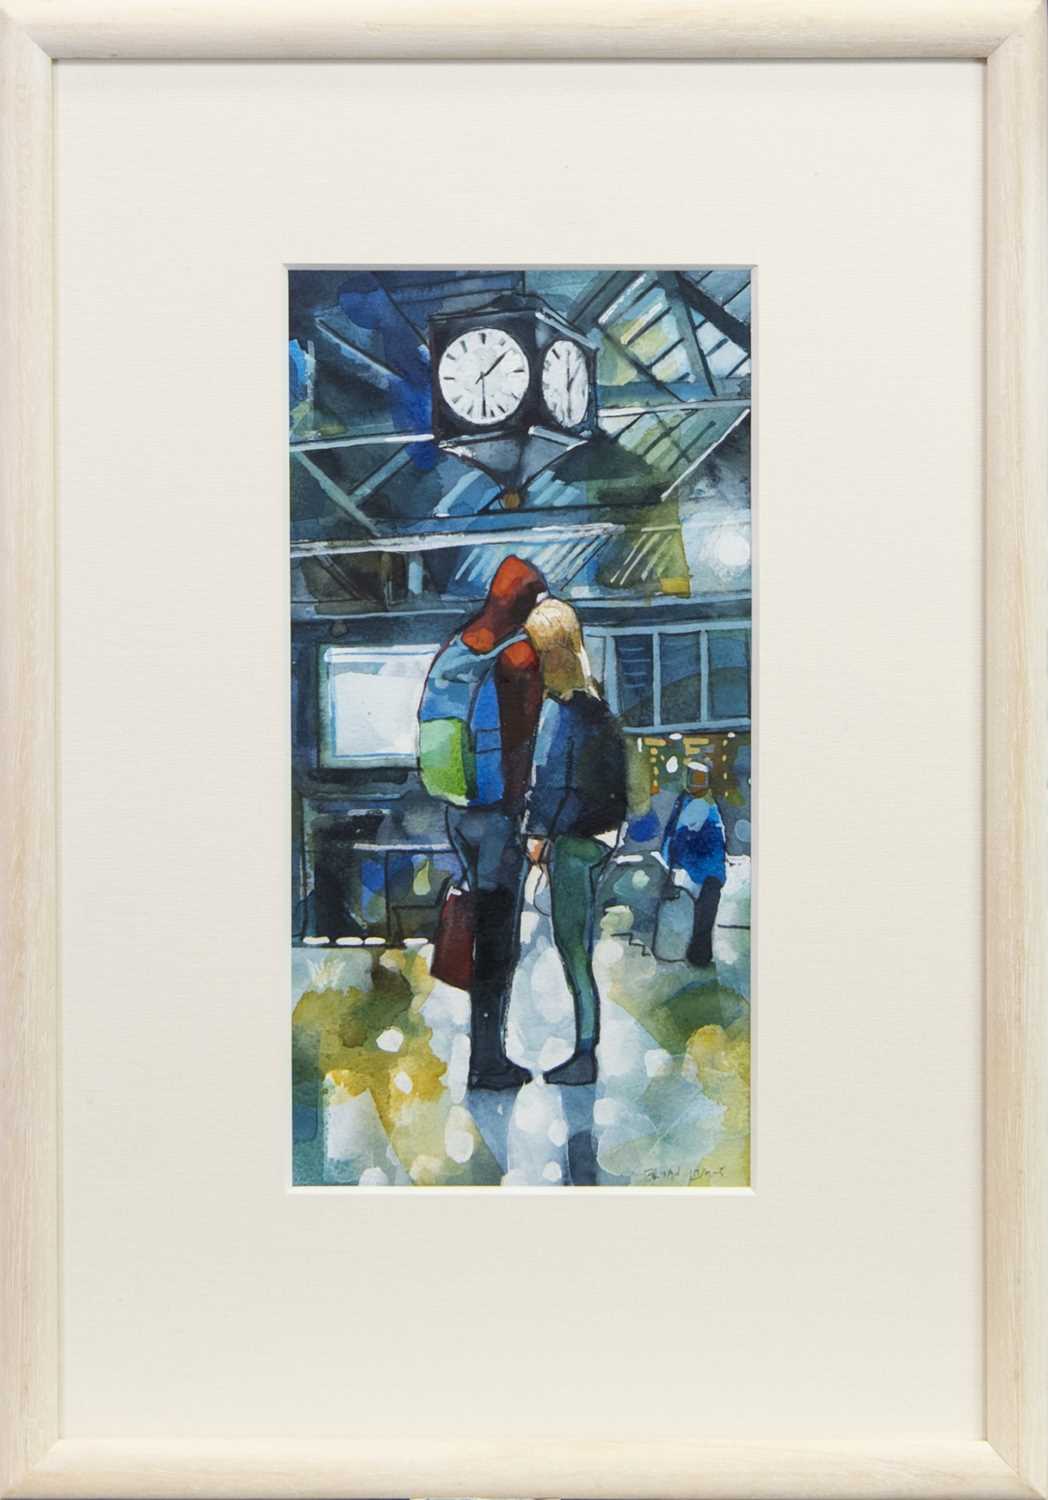 Lot 778 - ONE THIRTY AT CENTRAL STATION, A WATERCOLOUR BY BRYAN EVANS